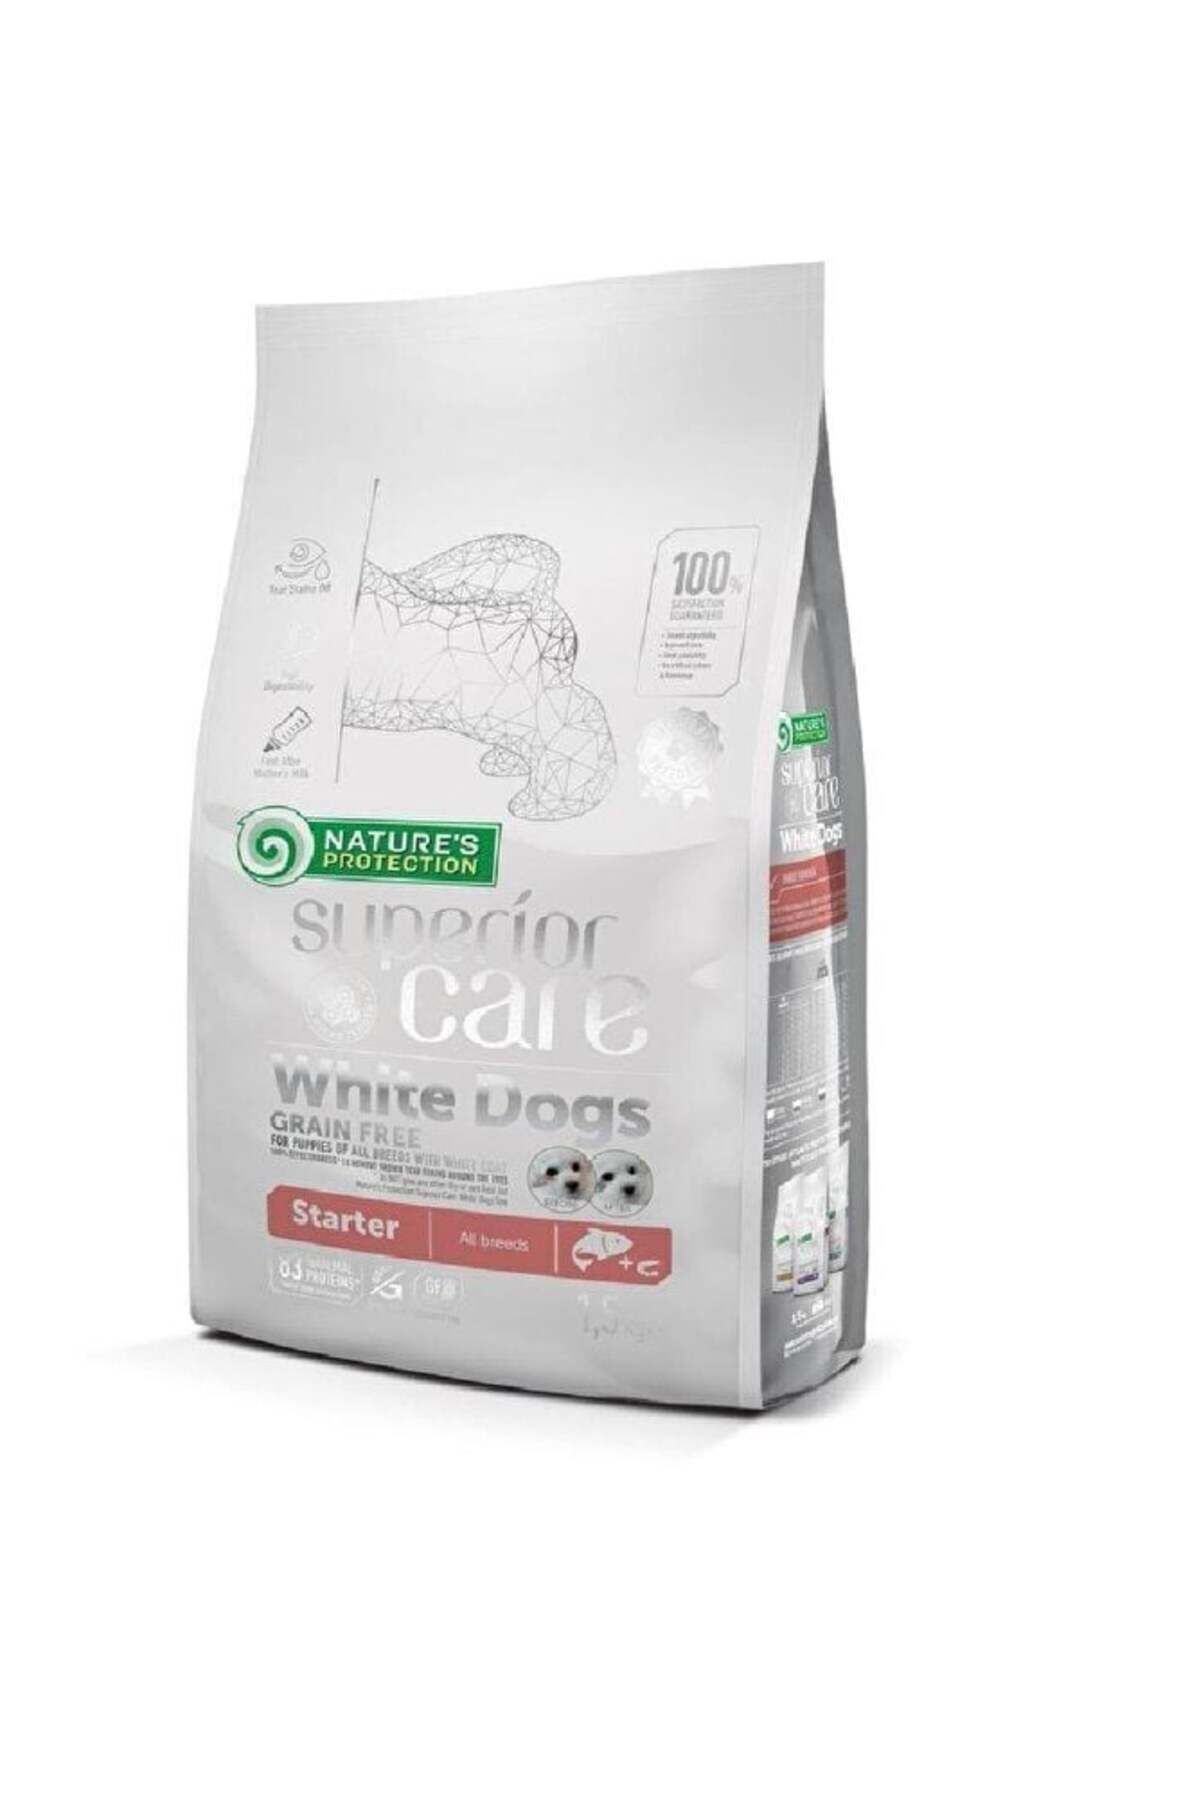 Nature's Protection Np Superior Care White Dogs Grain Free Salmon Starter All Breeds 1.5kg Food For Puppies Of All Breed